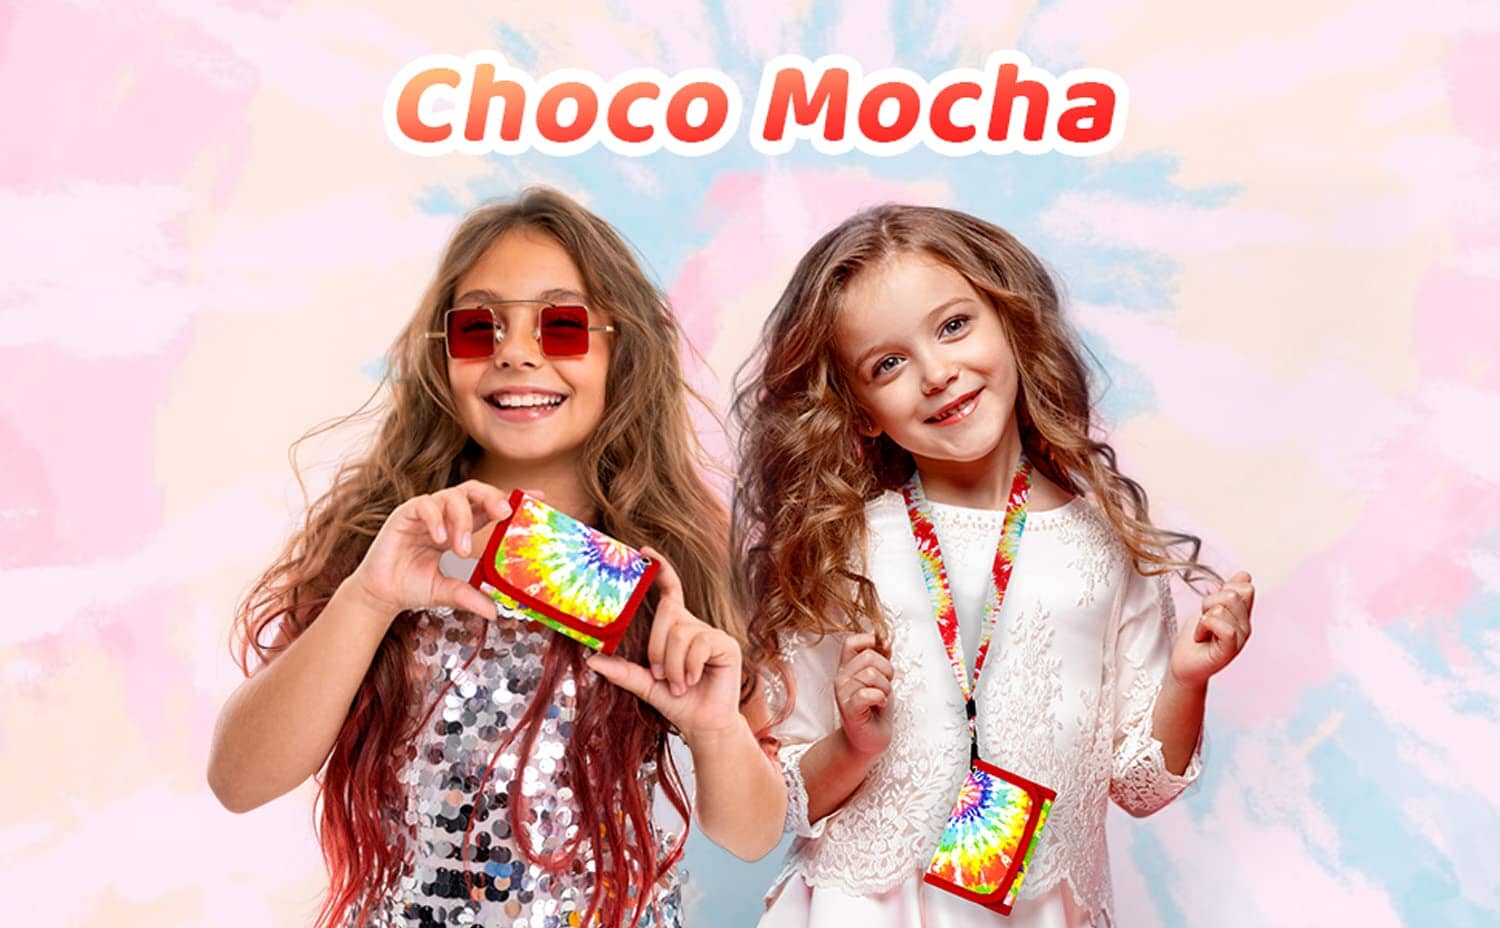 Choco Mocha Tie Dye Kids Wallets for Girls Ages 5-7 6-8 9-12, Little Girls Velcro Wallets with Lanyard Gift Box, Christmas Gift for Kids Girls, Multicolor Firework chocomochakids 